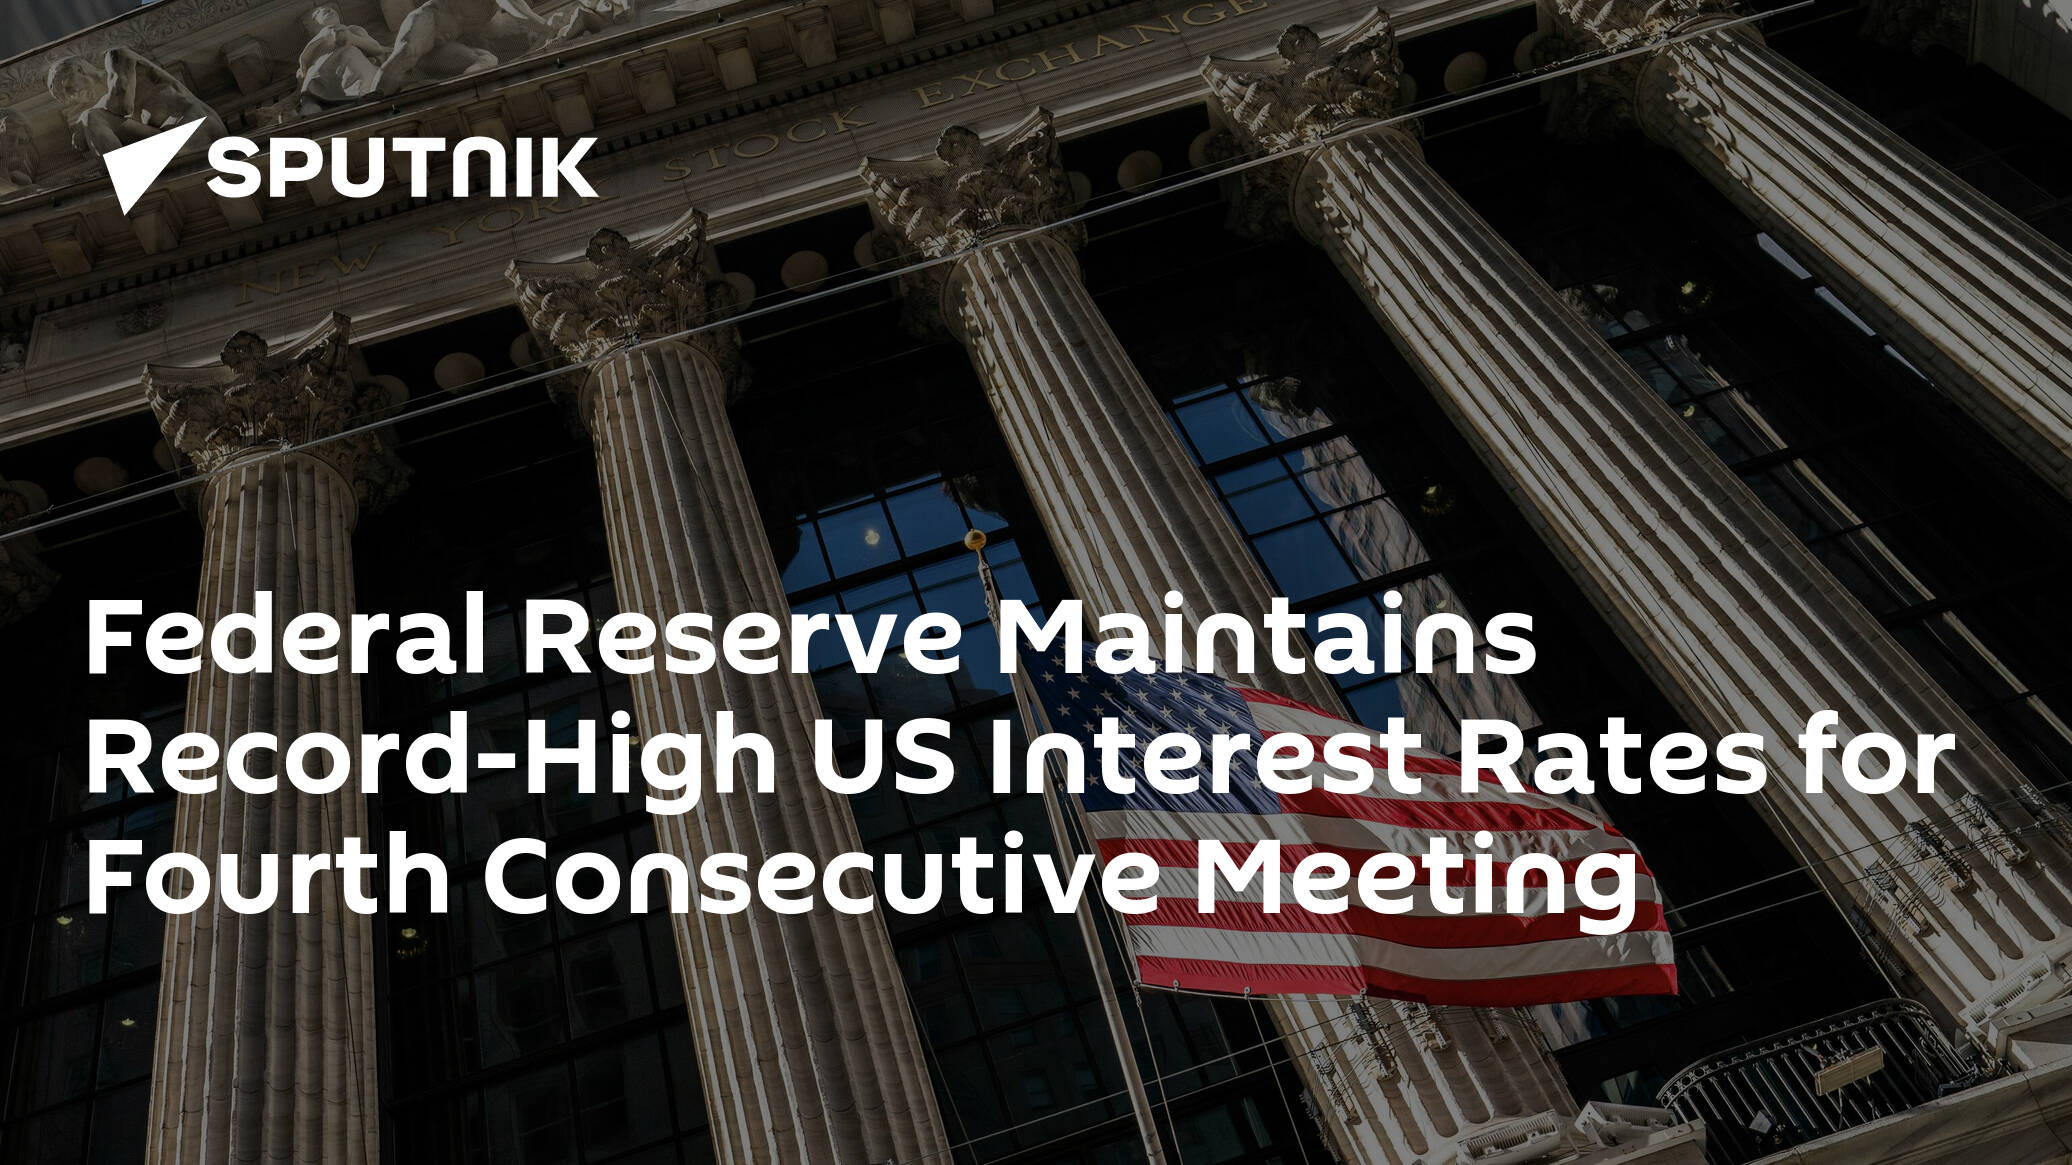 Federal Reserve Leaves US Interest Rates Unchanged at 22-Year High